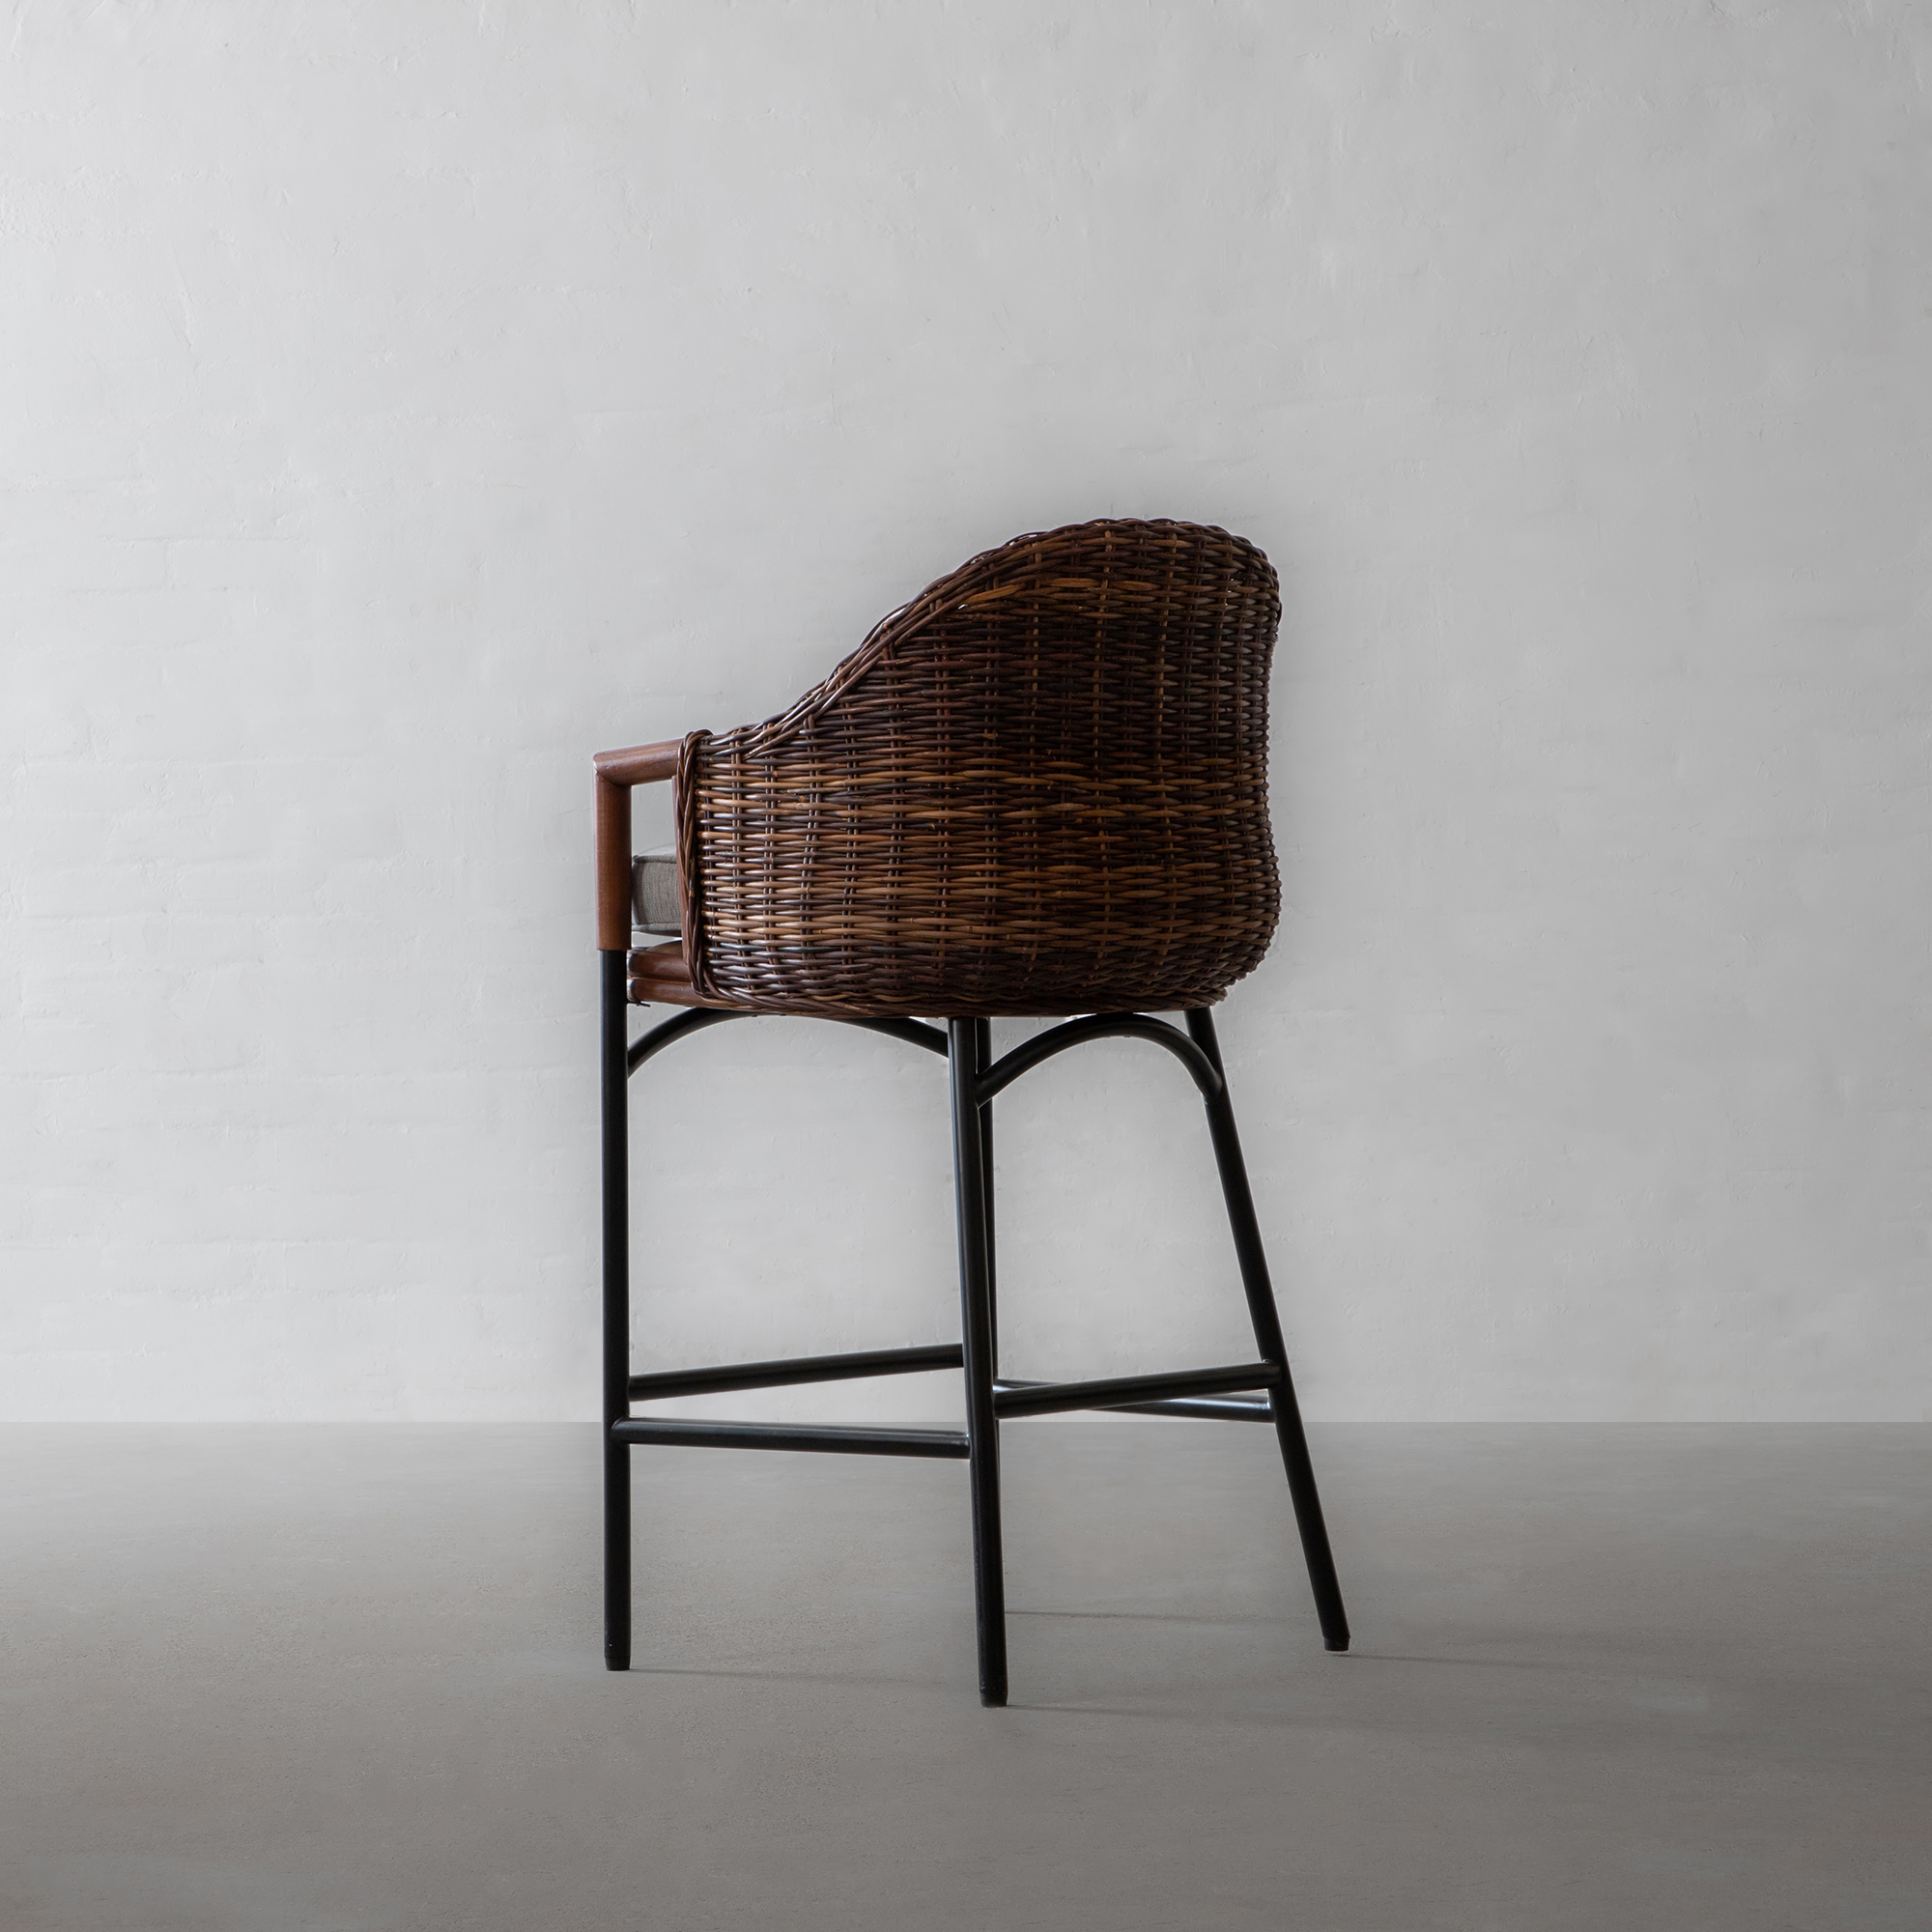 The Brussels Bar Chair